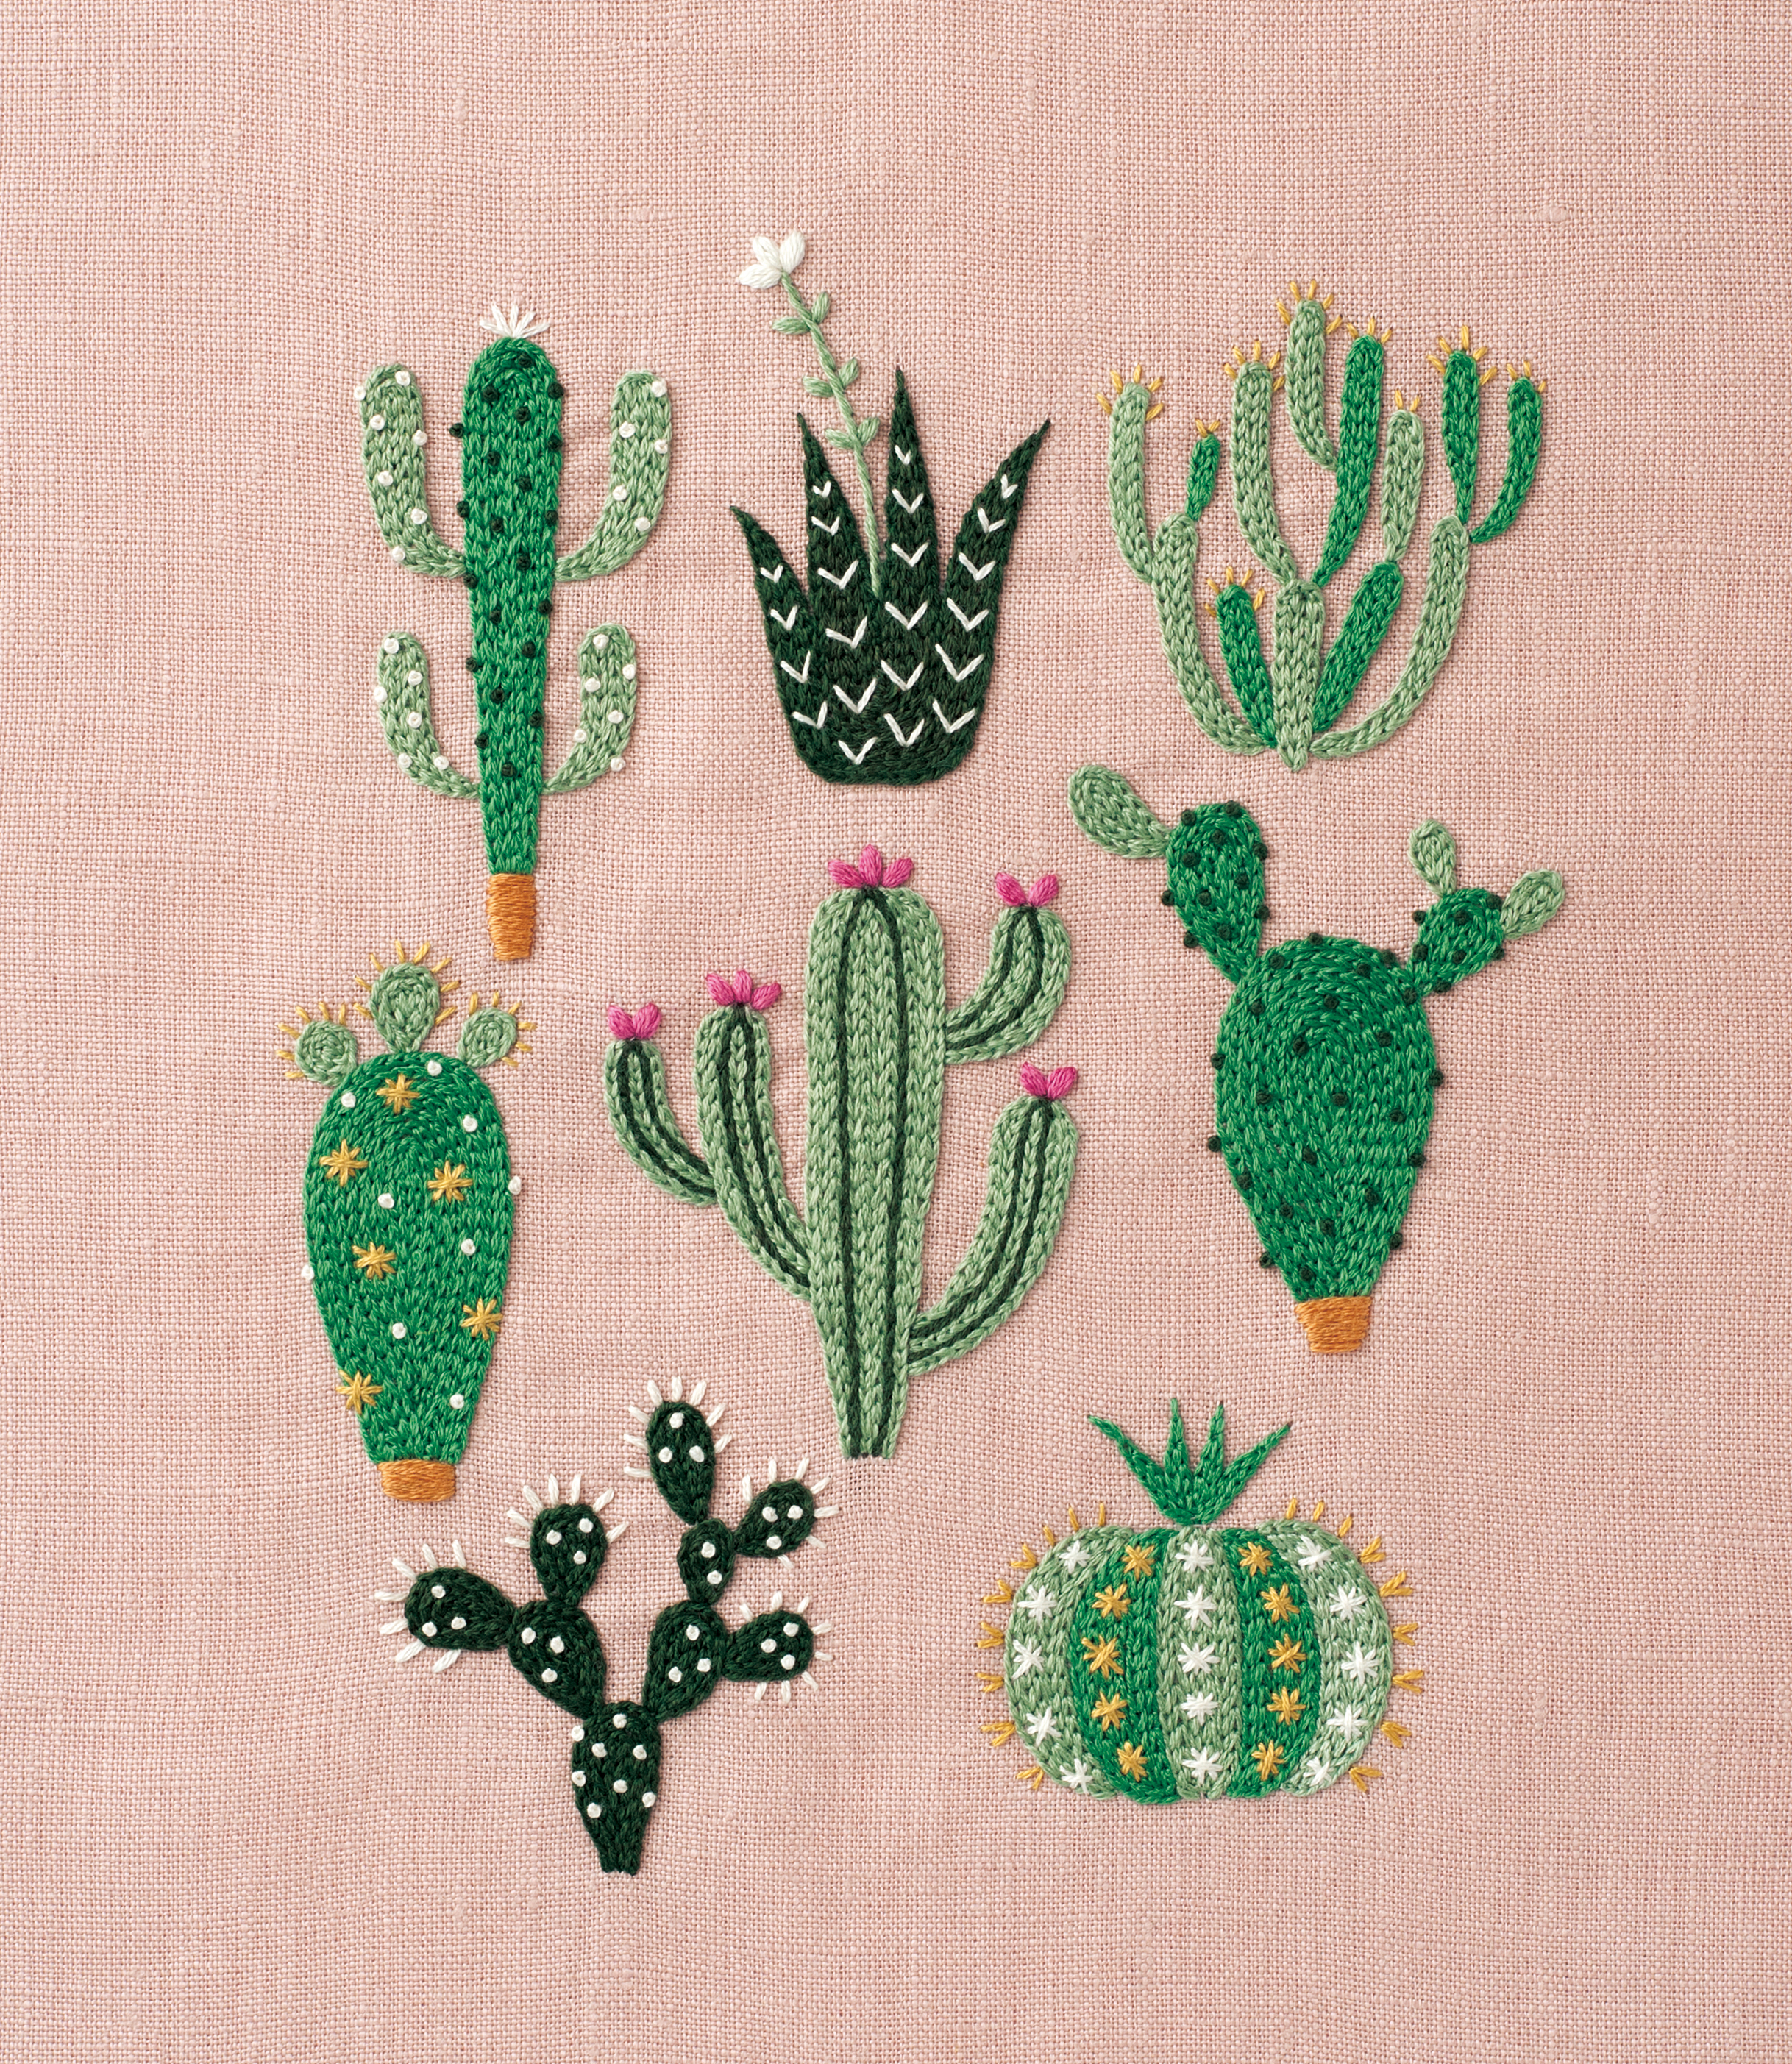 Flower Embroidery Patterns Diy Floral Cactus Embroidery Projects From A Year Of Embroidery